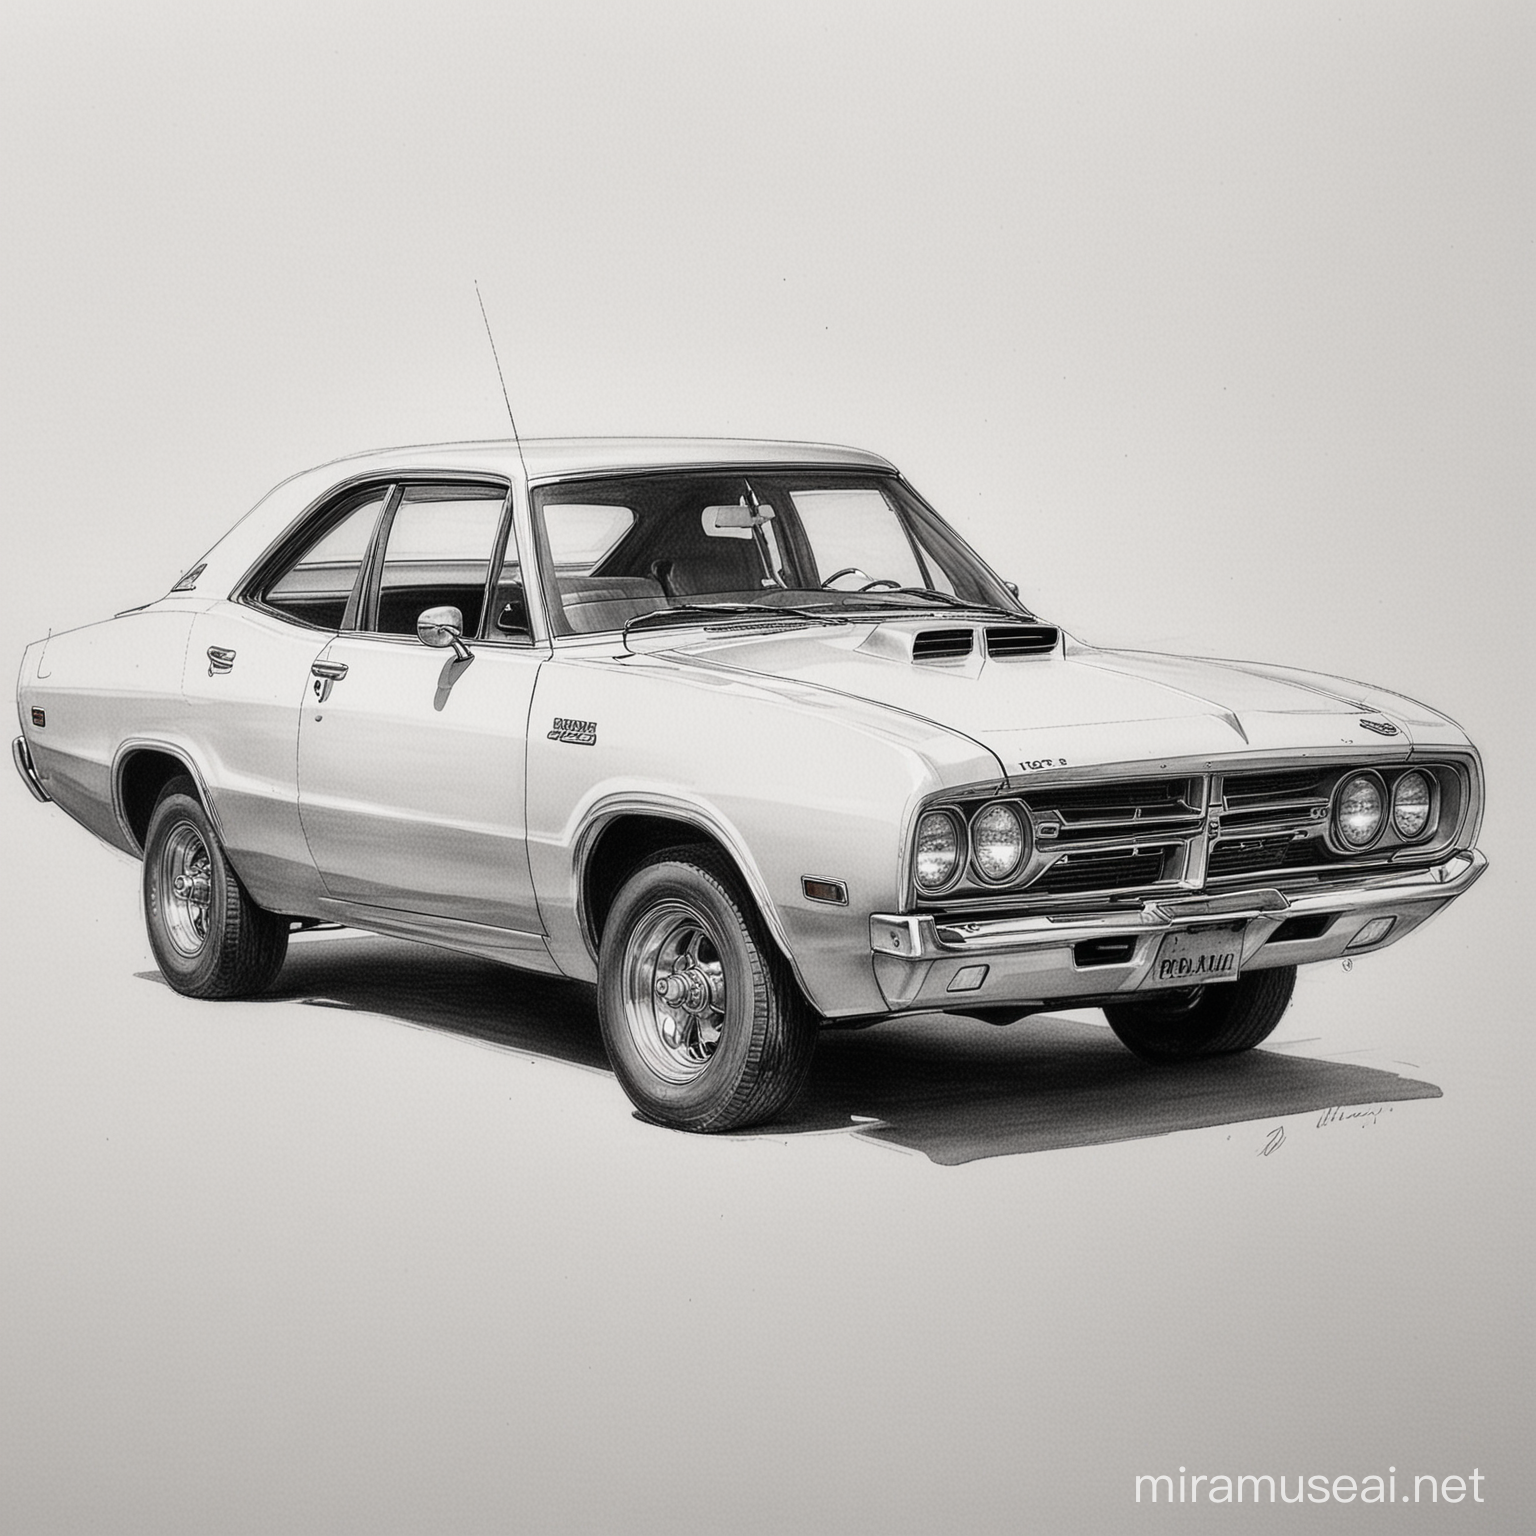 Sketch Drawing of a Classic Dodge Parola in Black and White